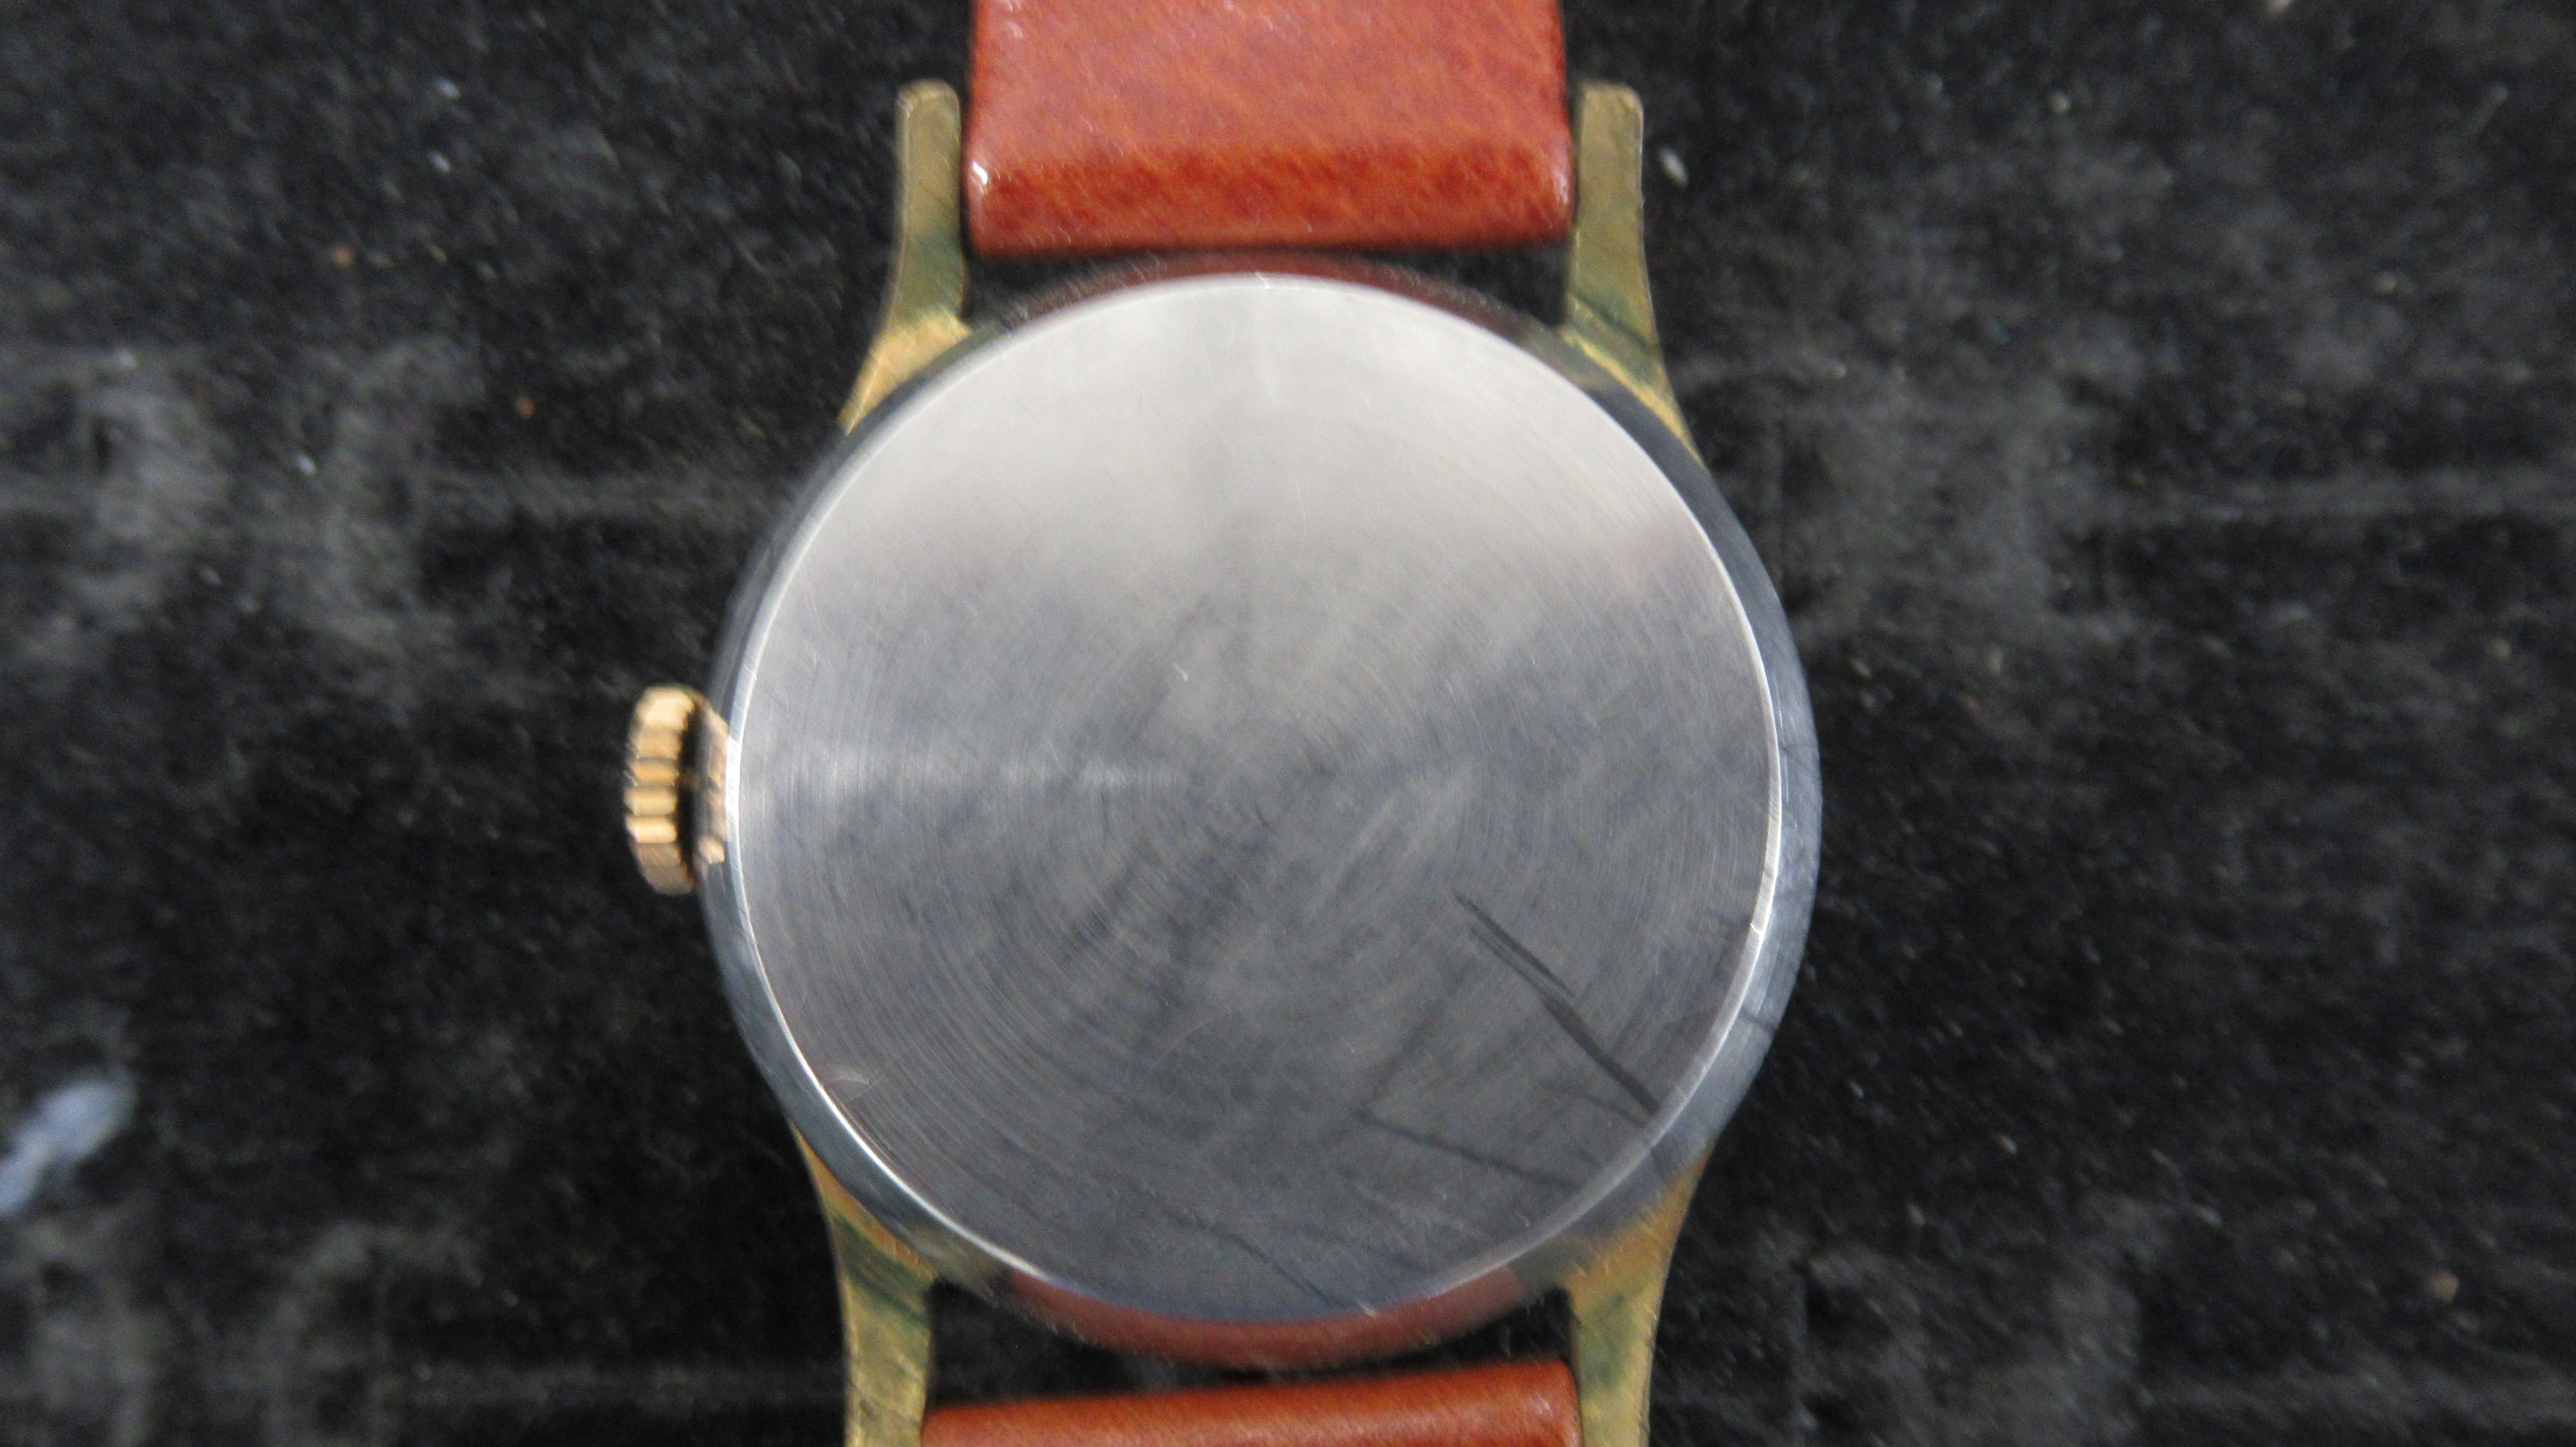 A Smiths Empire manual wind Gents watch on a leather strap, working in saleroom - Image 2 of 3